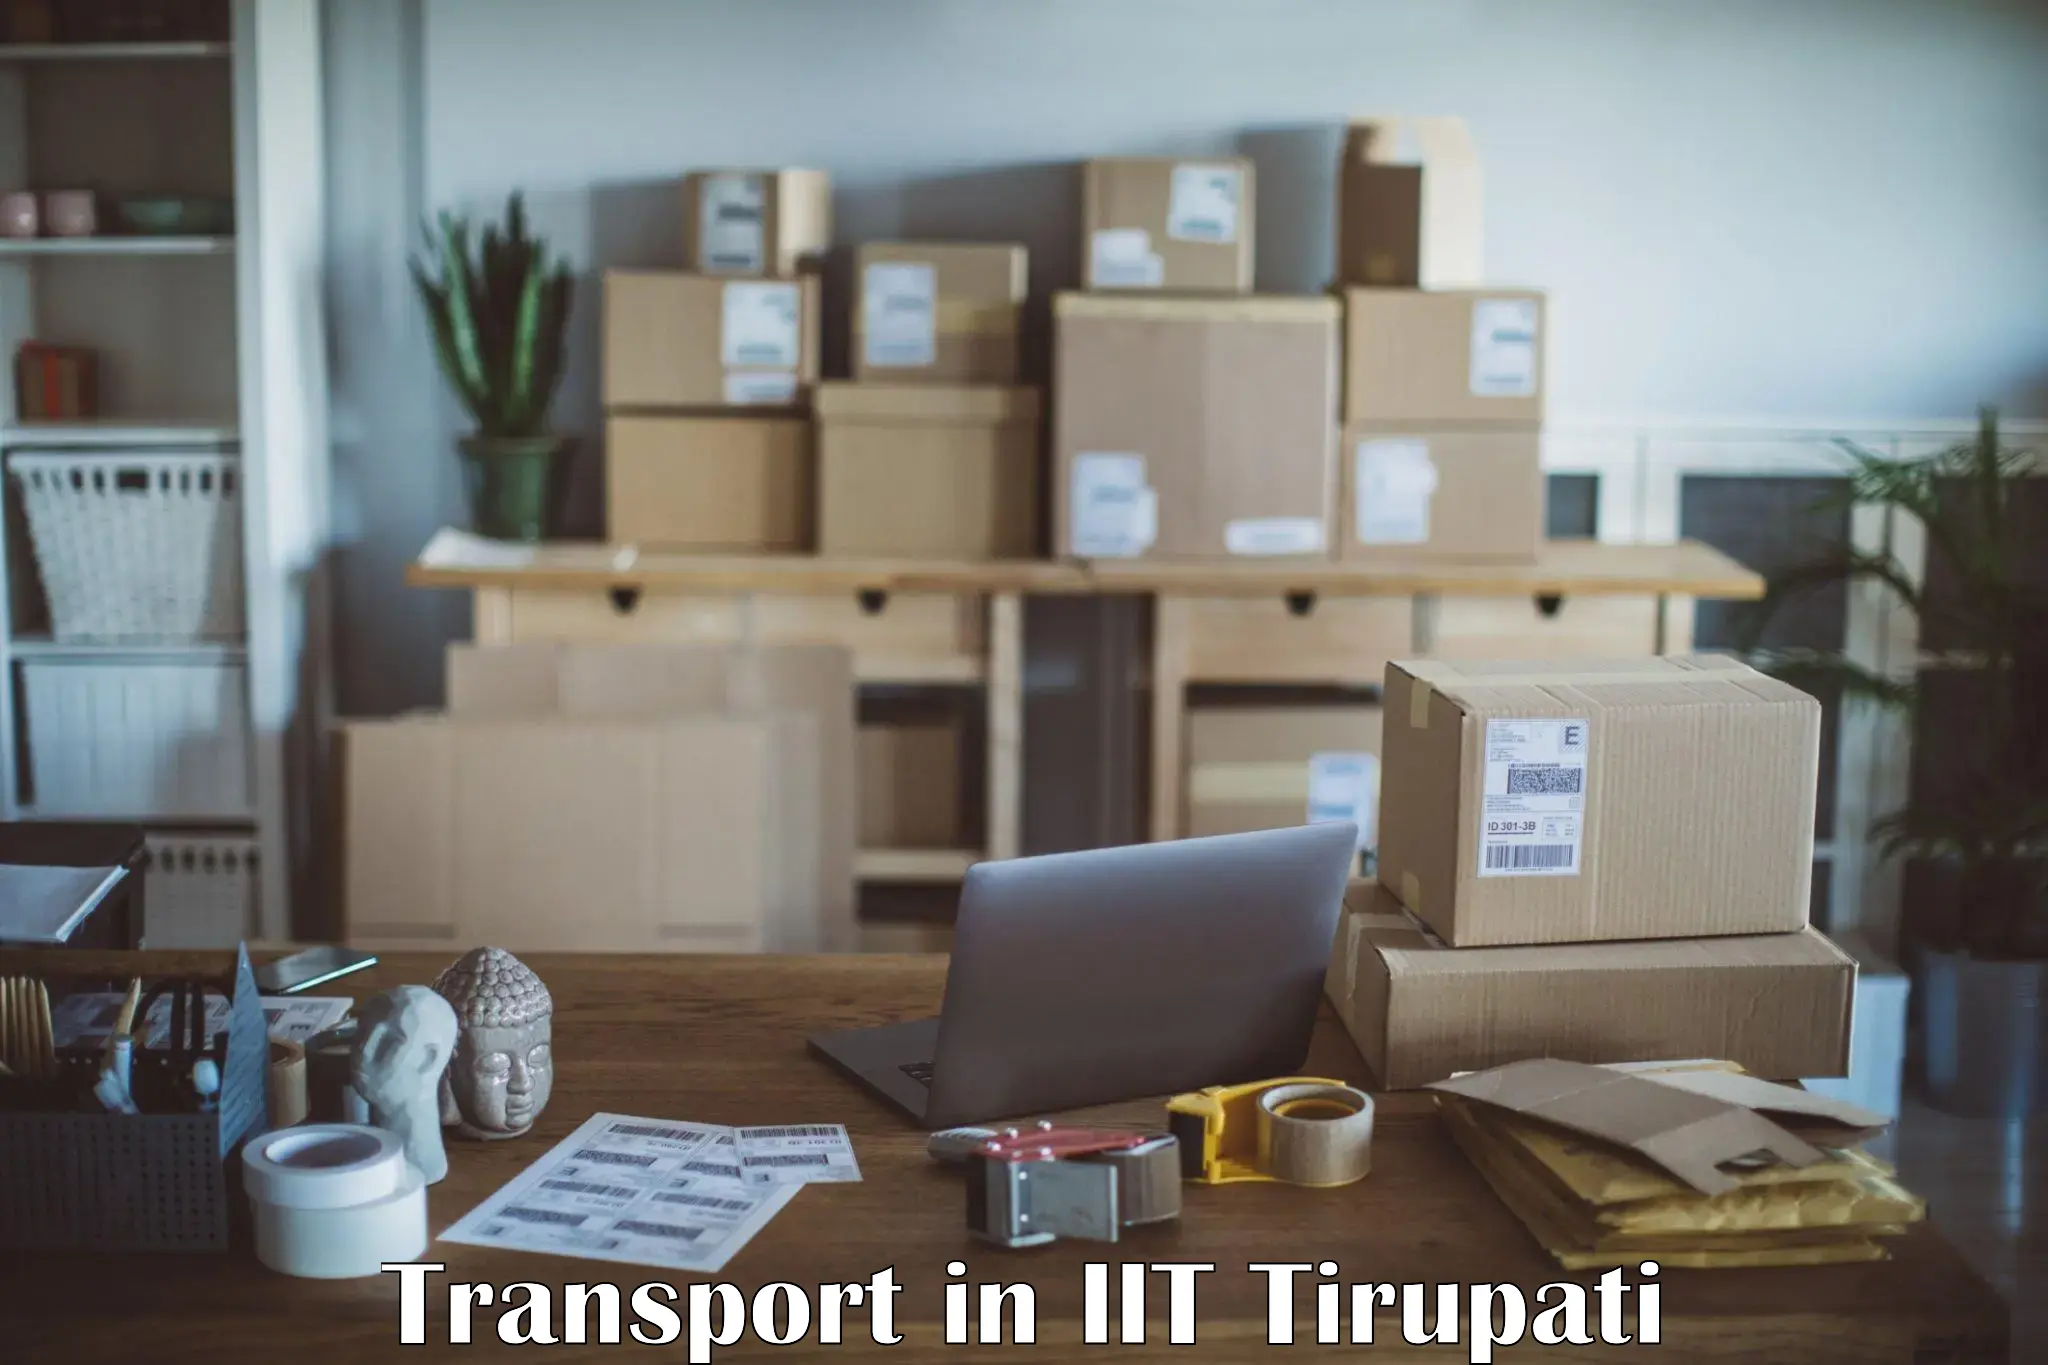 Transport bike from one state to another in IIT Tirupati